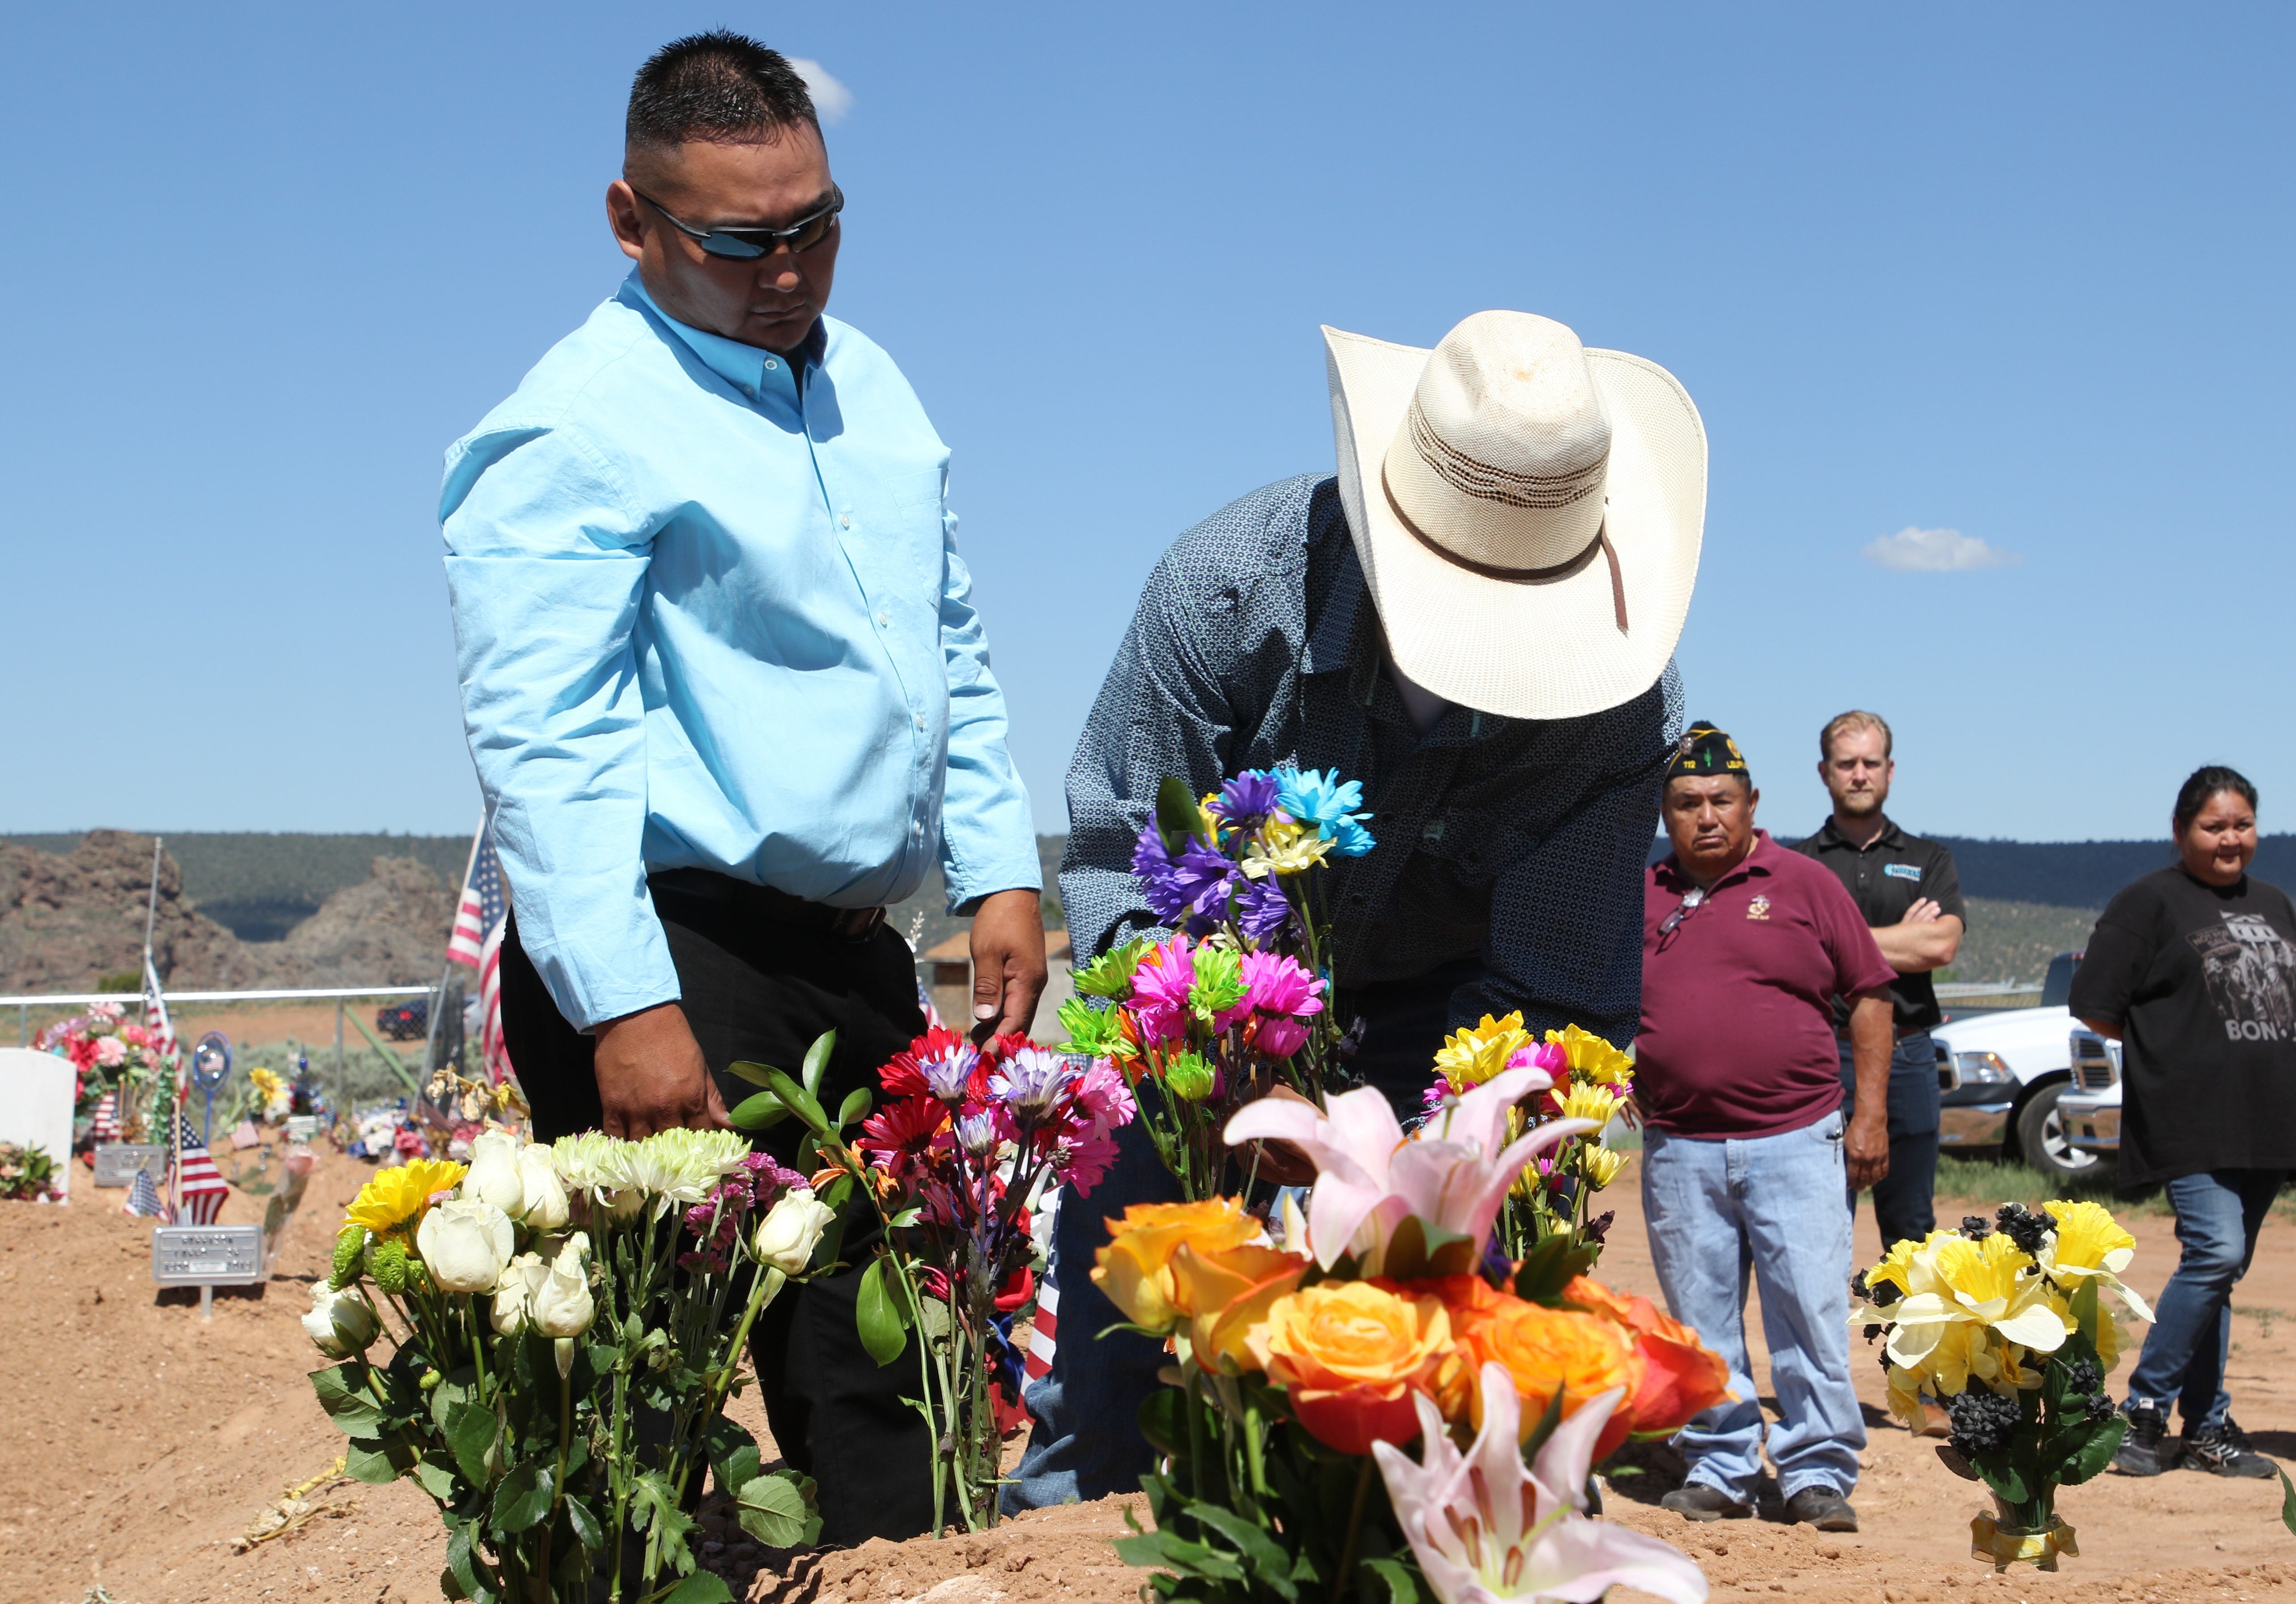 Dewhite Brown, left, watches as flowers are placed on the grave of his father, Navajo Code Talker William Tully Brown Sr., on June 6 at the Fort Defiance Veterans Cemetery in Fort Defiance, Ariz.